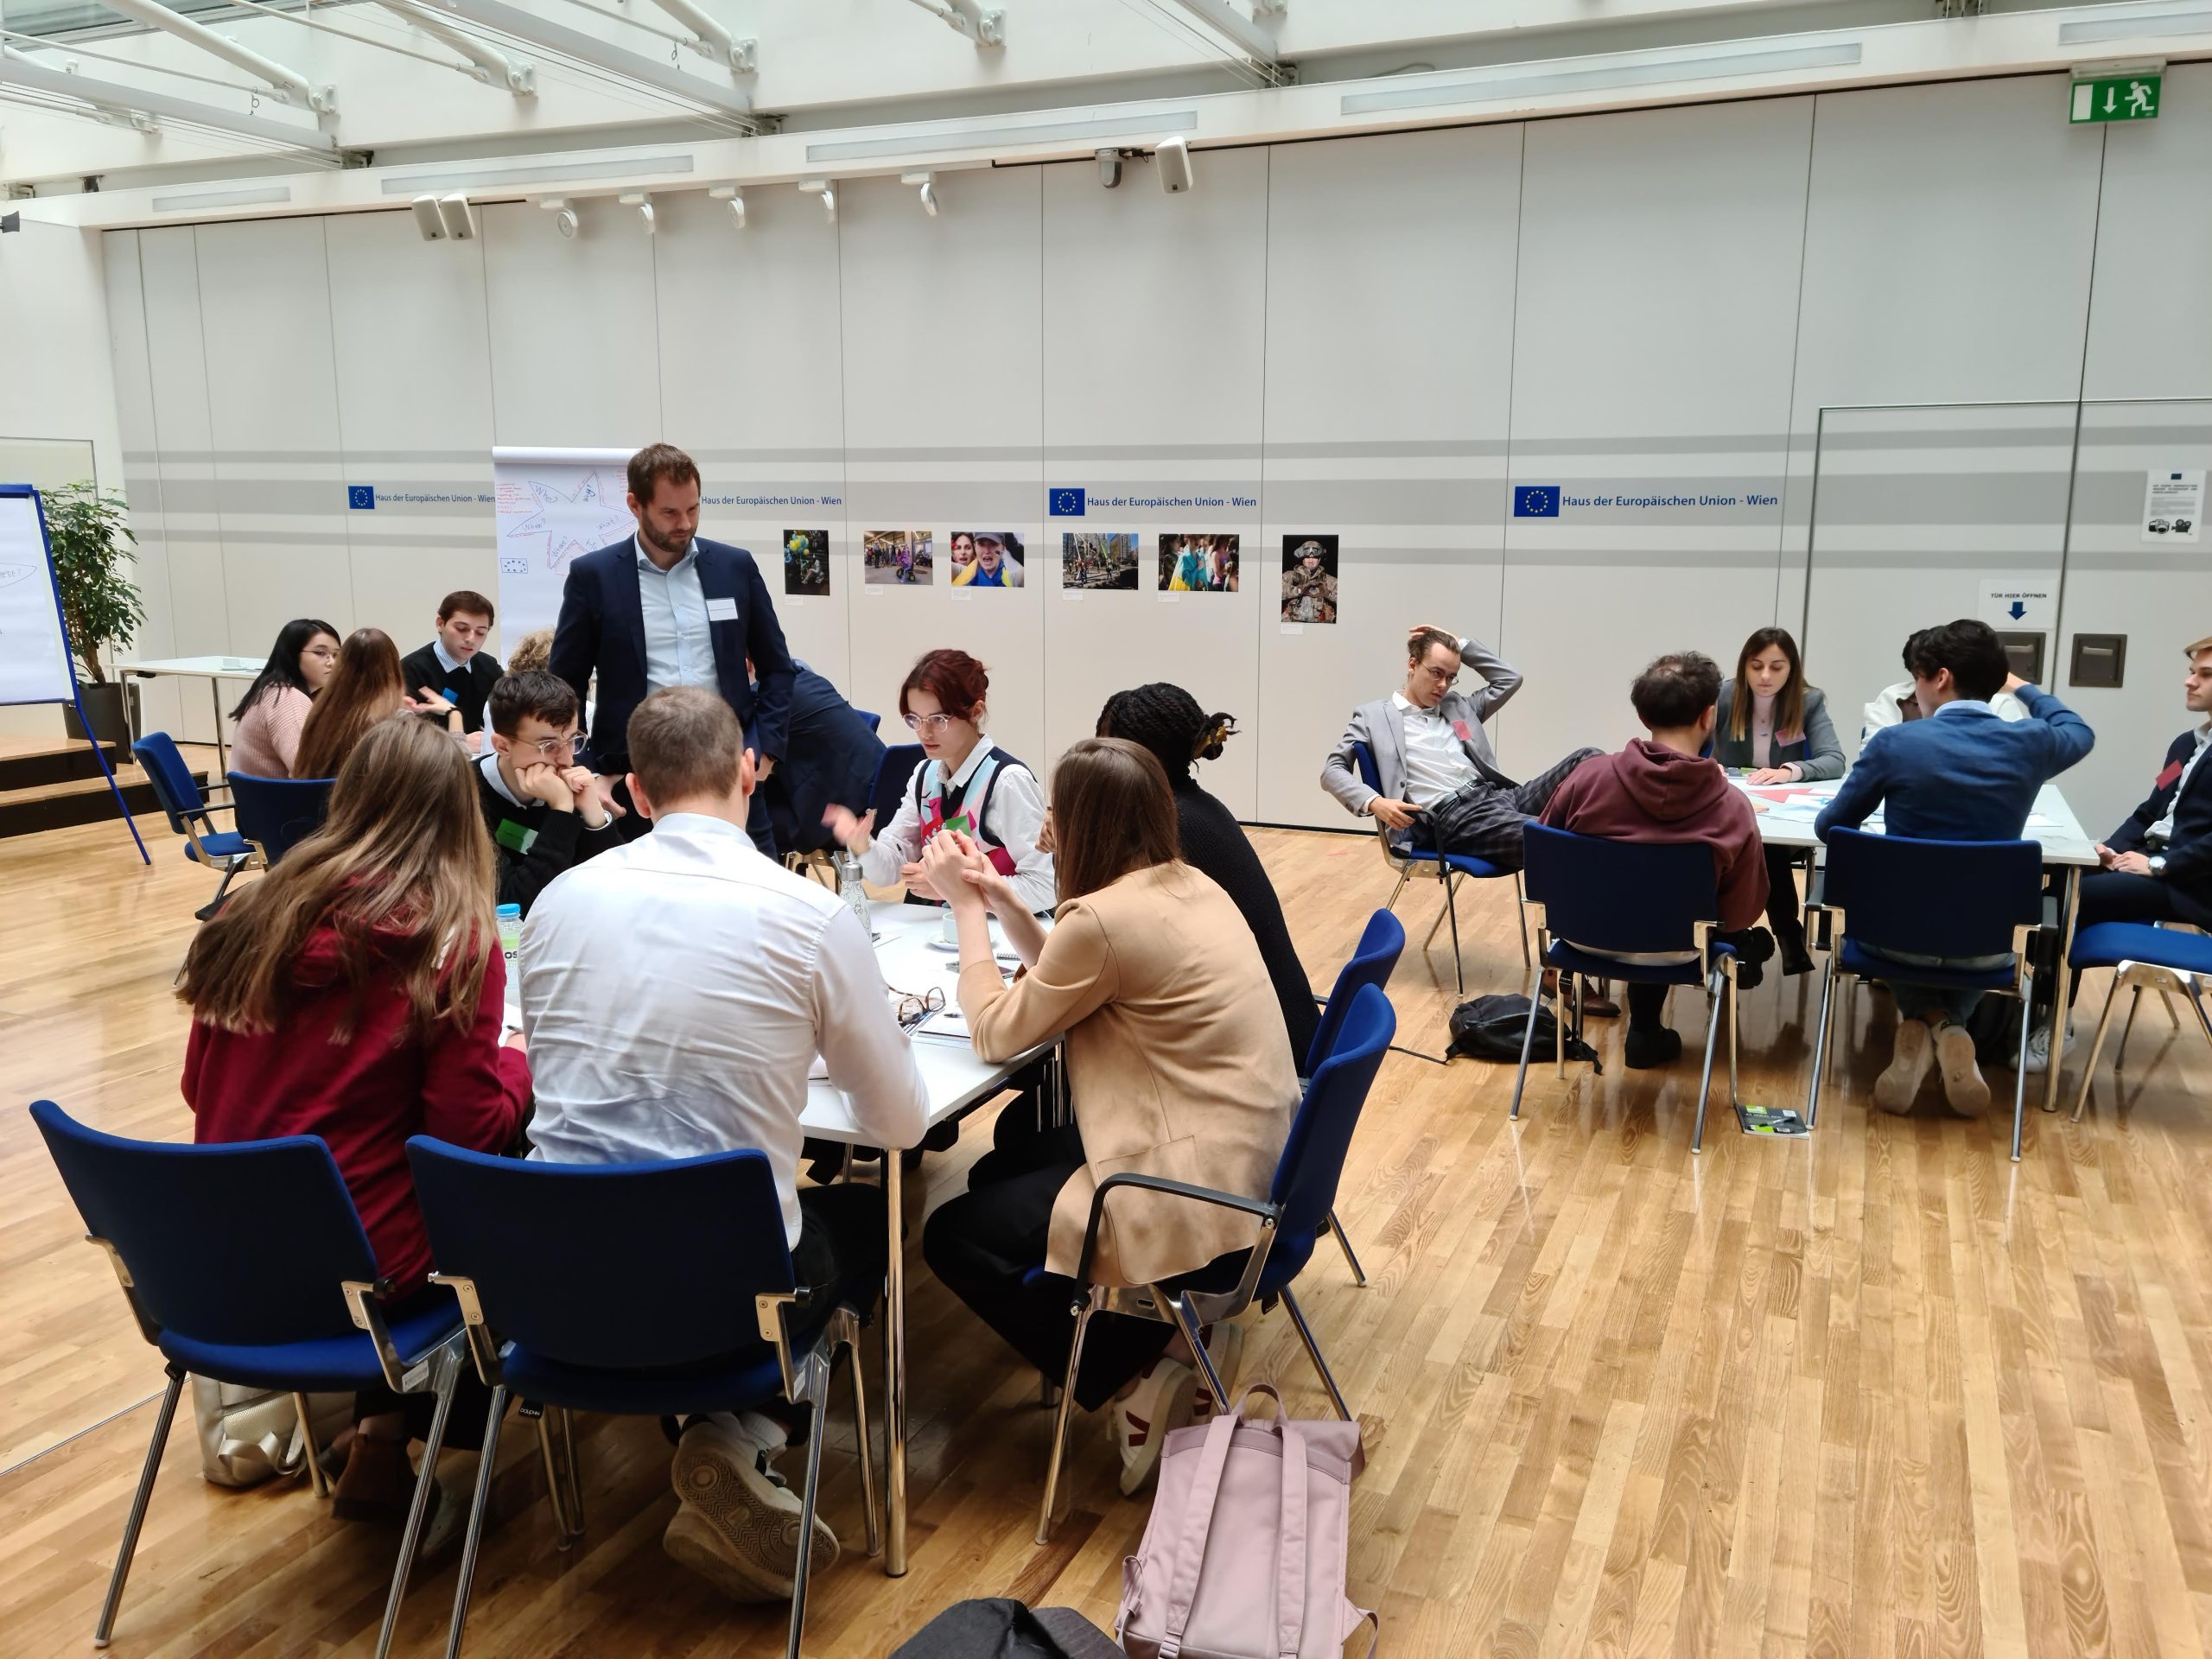 Workshop at Radar Youth Lab at the House of the EU, on 13th November 2023